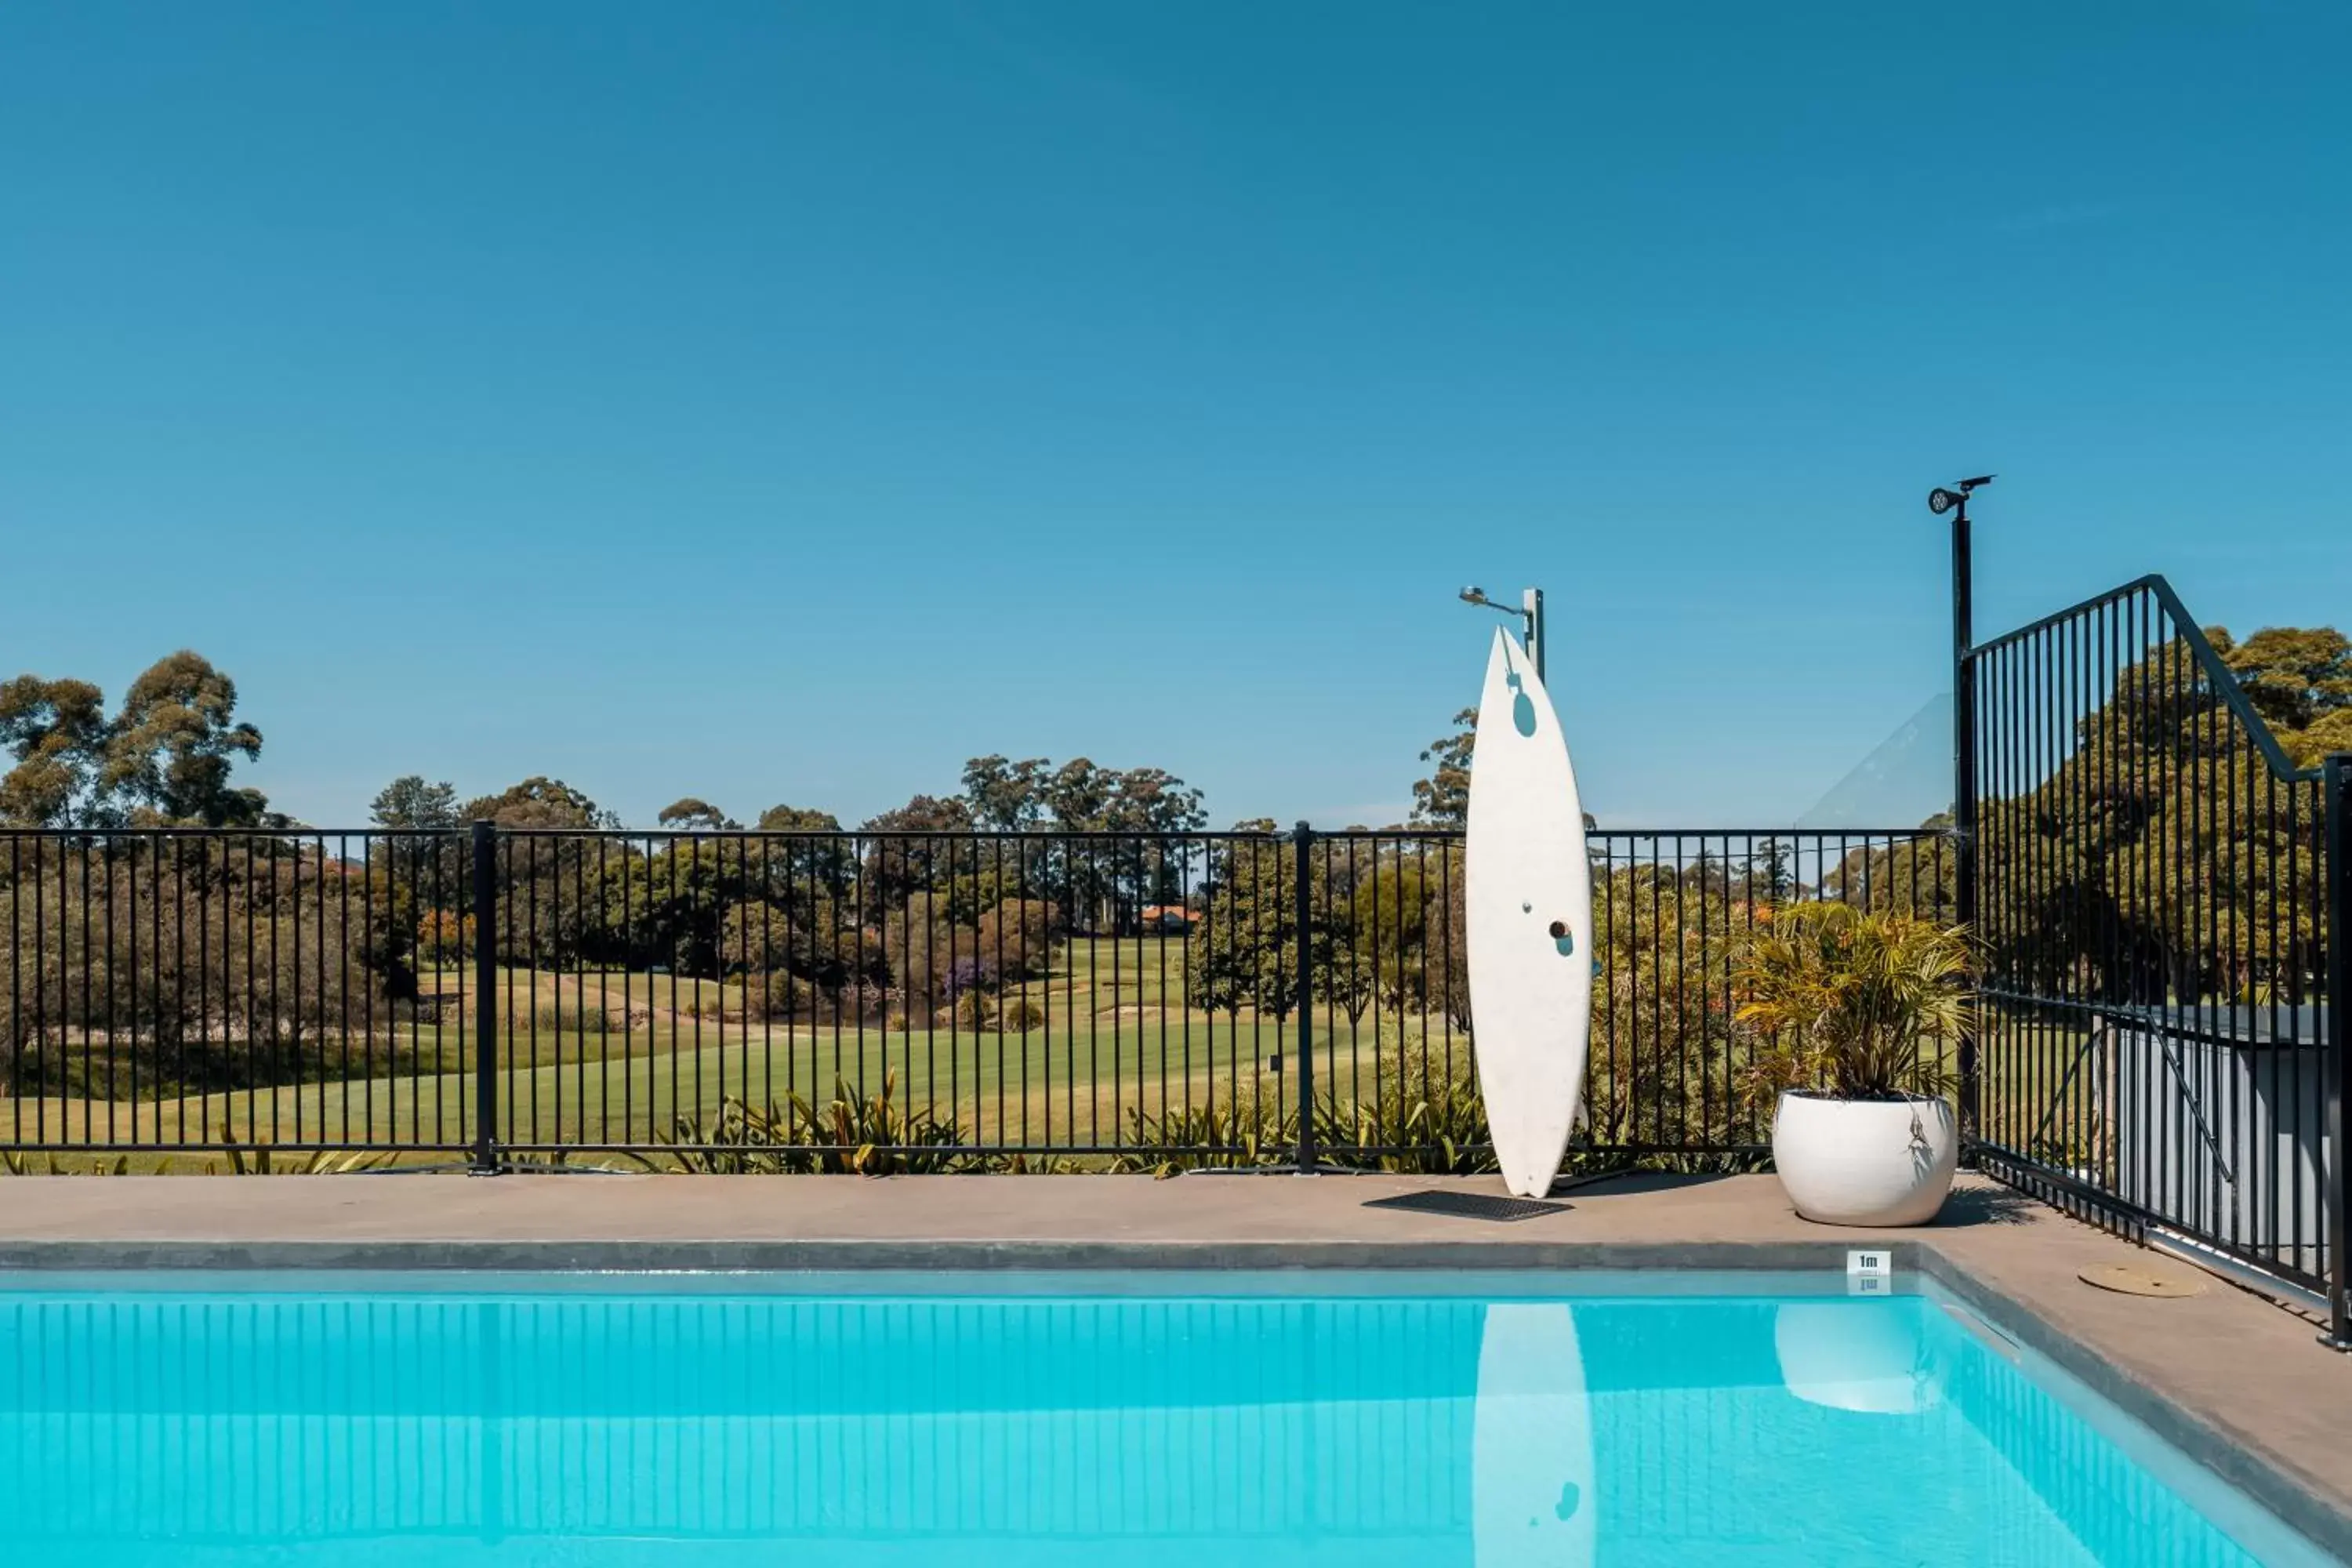 Property building, Swimming Pool in The Select Inn Ryde